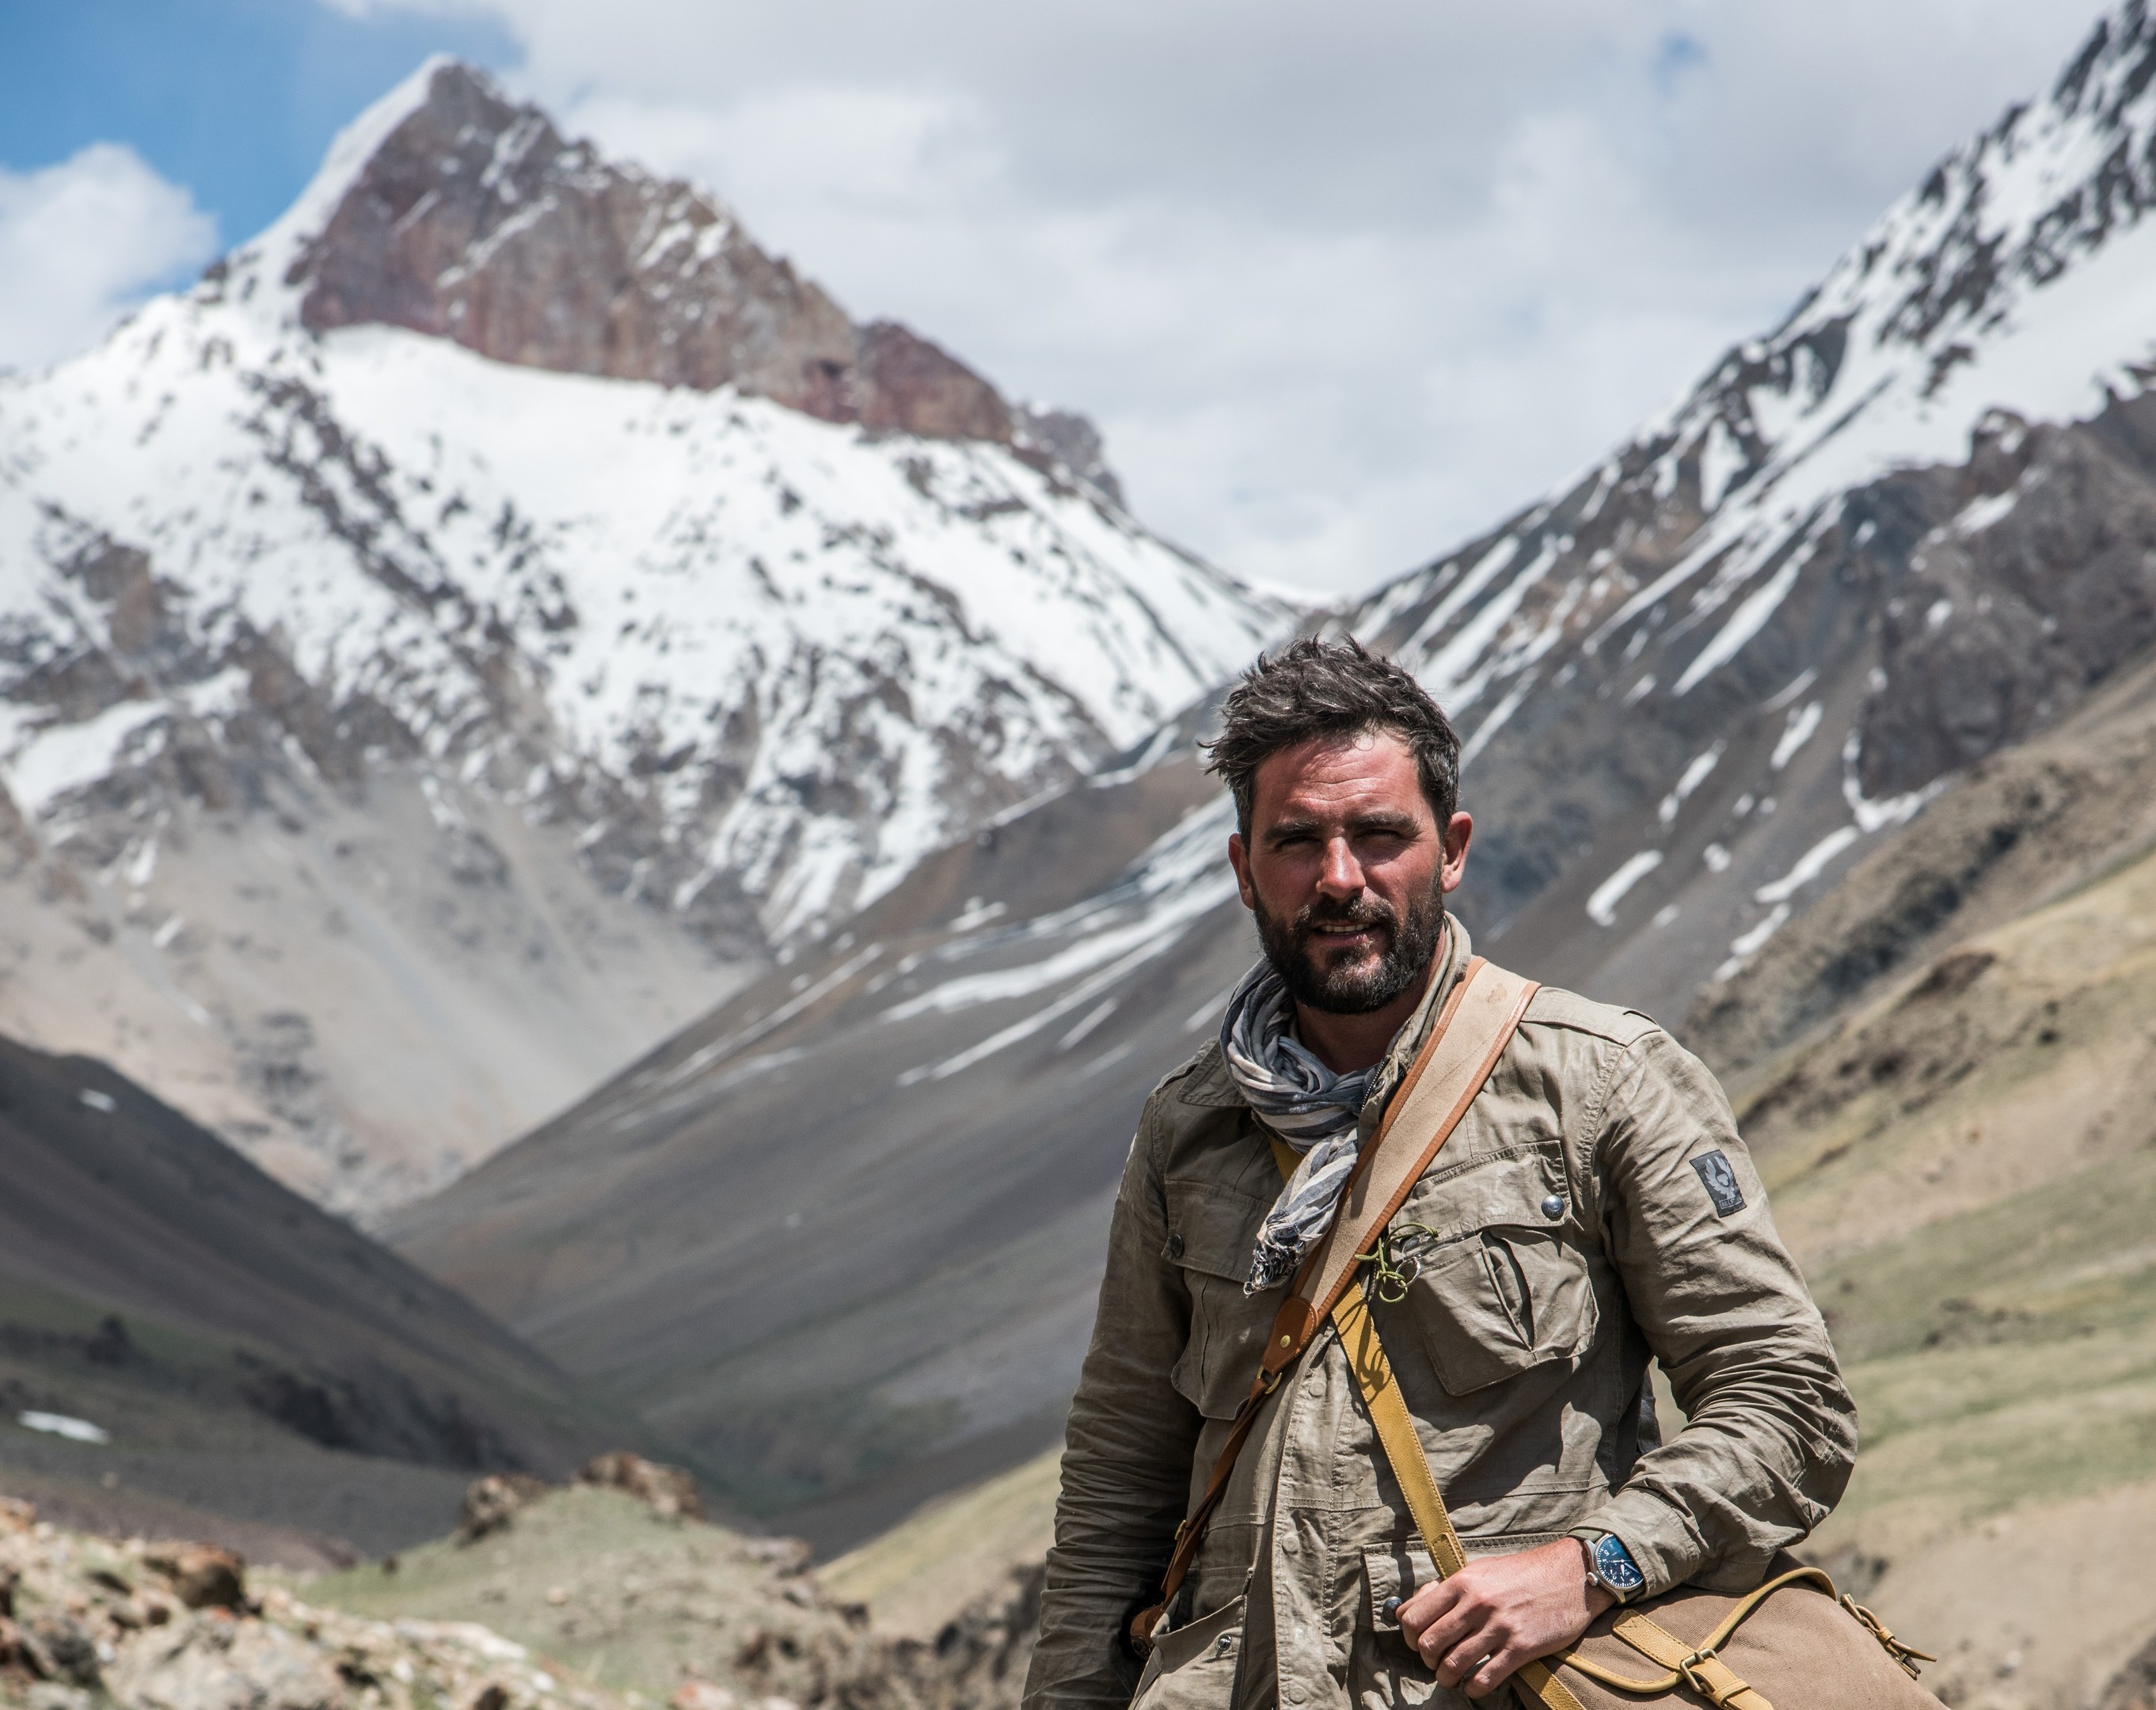 Levison Wood tells the story of his mountain trek in his book "Walking the Himalayas" (Tom McShane)